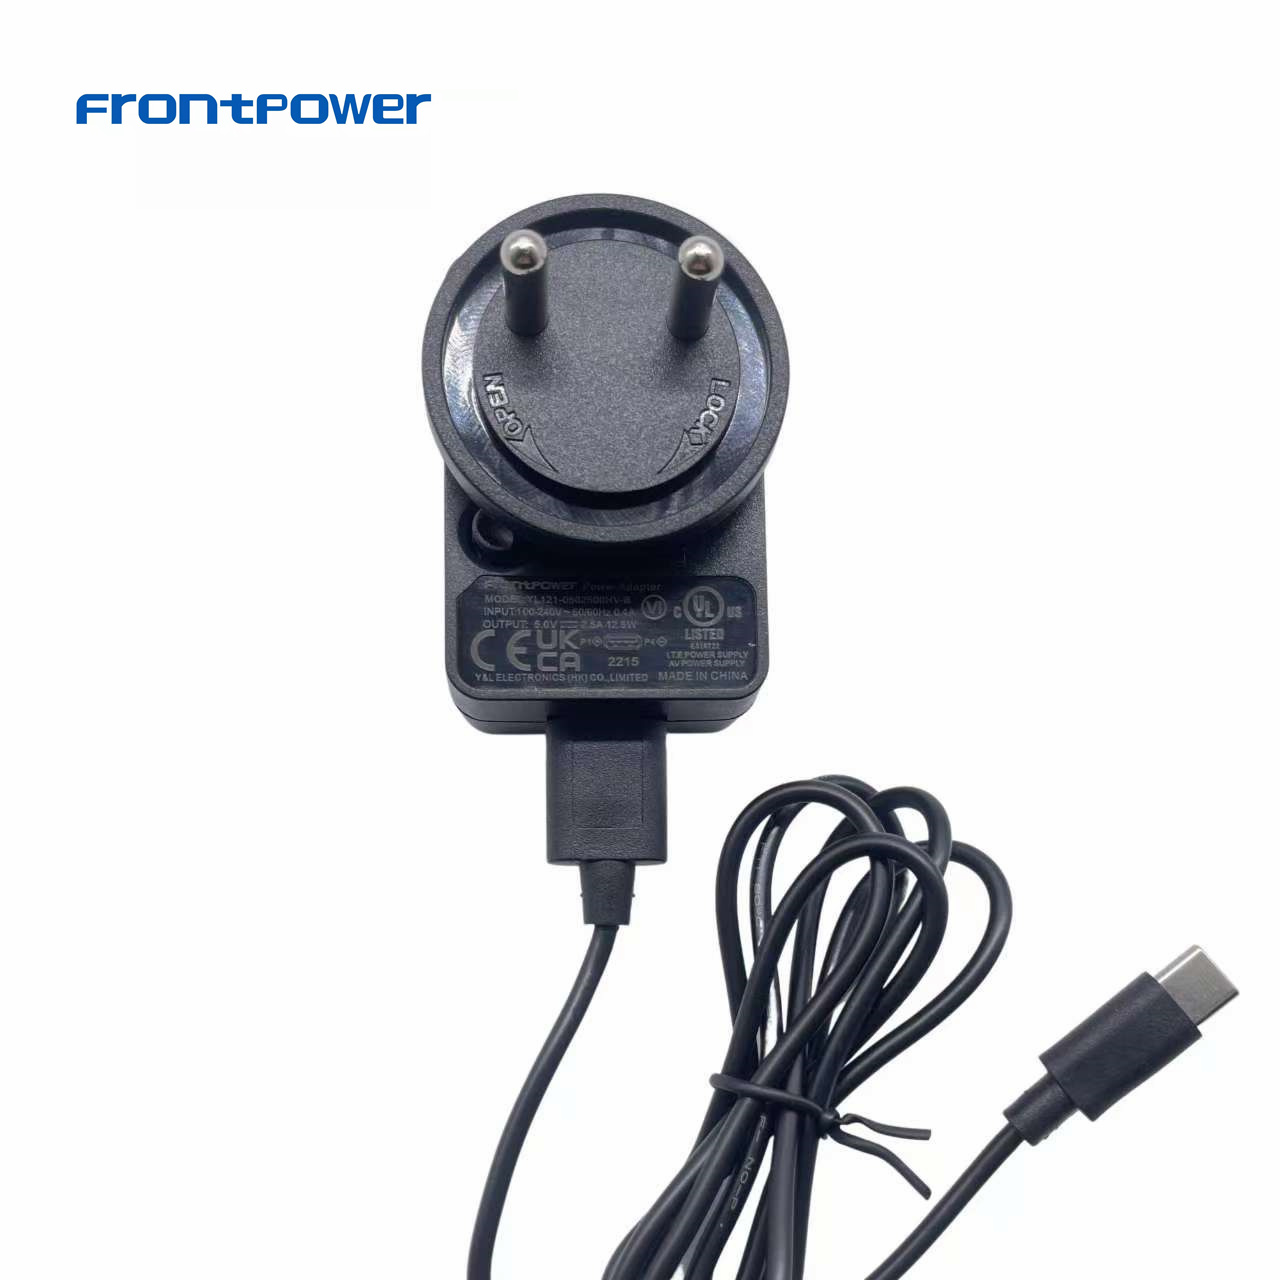 5V2A 5V2.5A 5V3A BIS US EU UK AU PSE Plug Power Adapter SMPS Switching Power Supply ECAS UL ETL SAA BIS PSE SAA Indian Charger